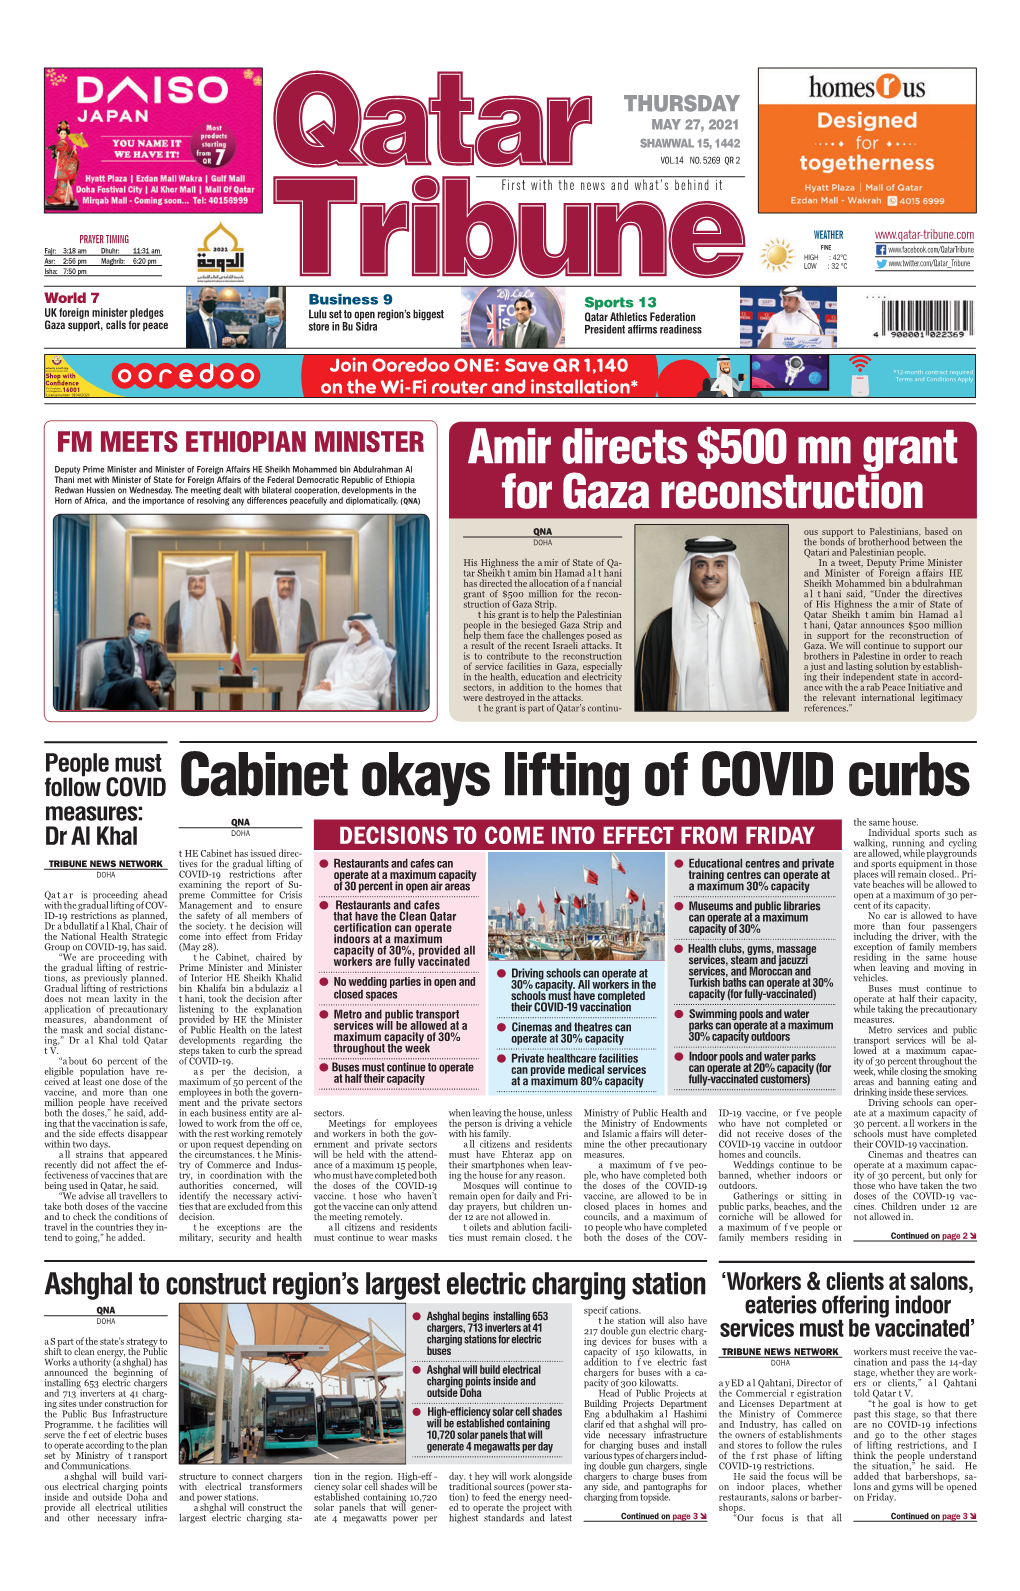 Cabinet Okays Lifting of COVID Curbs Measures: QNA the Same House